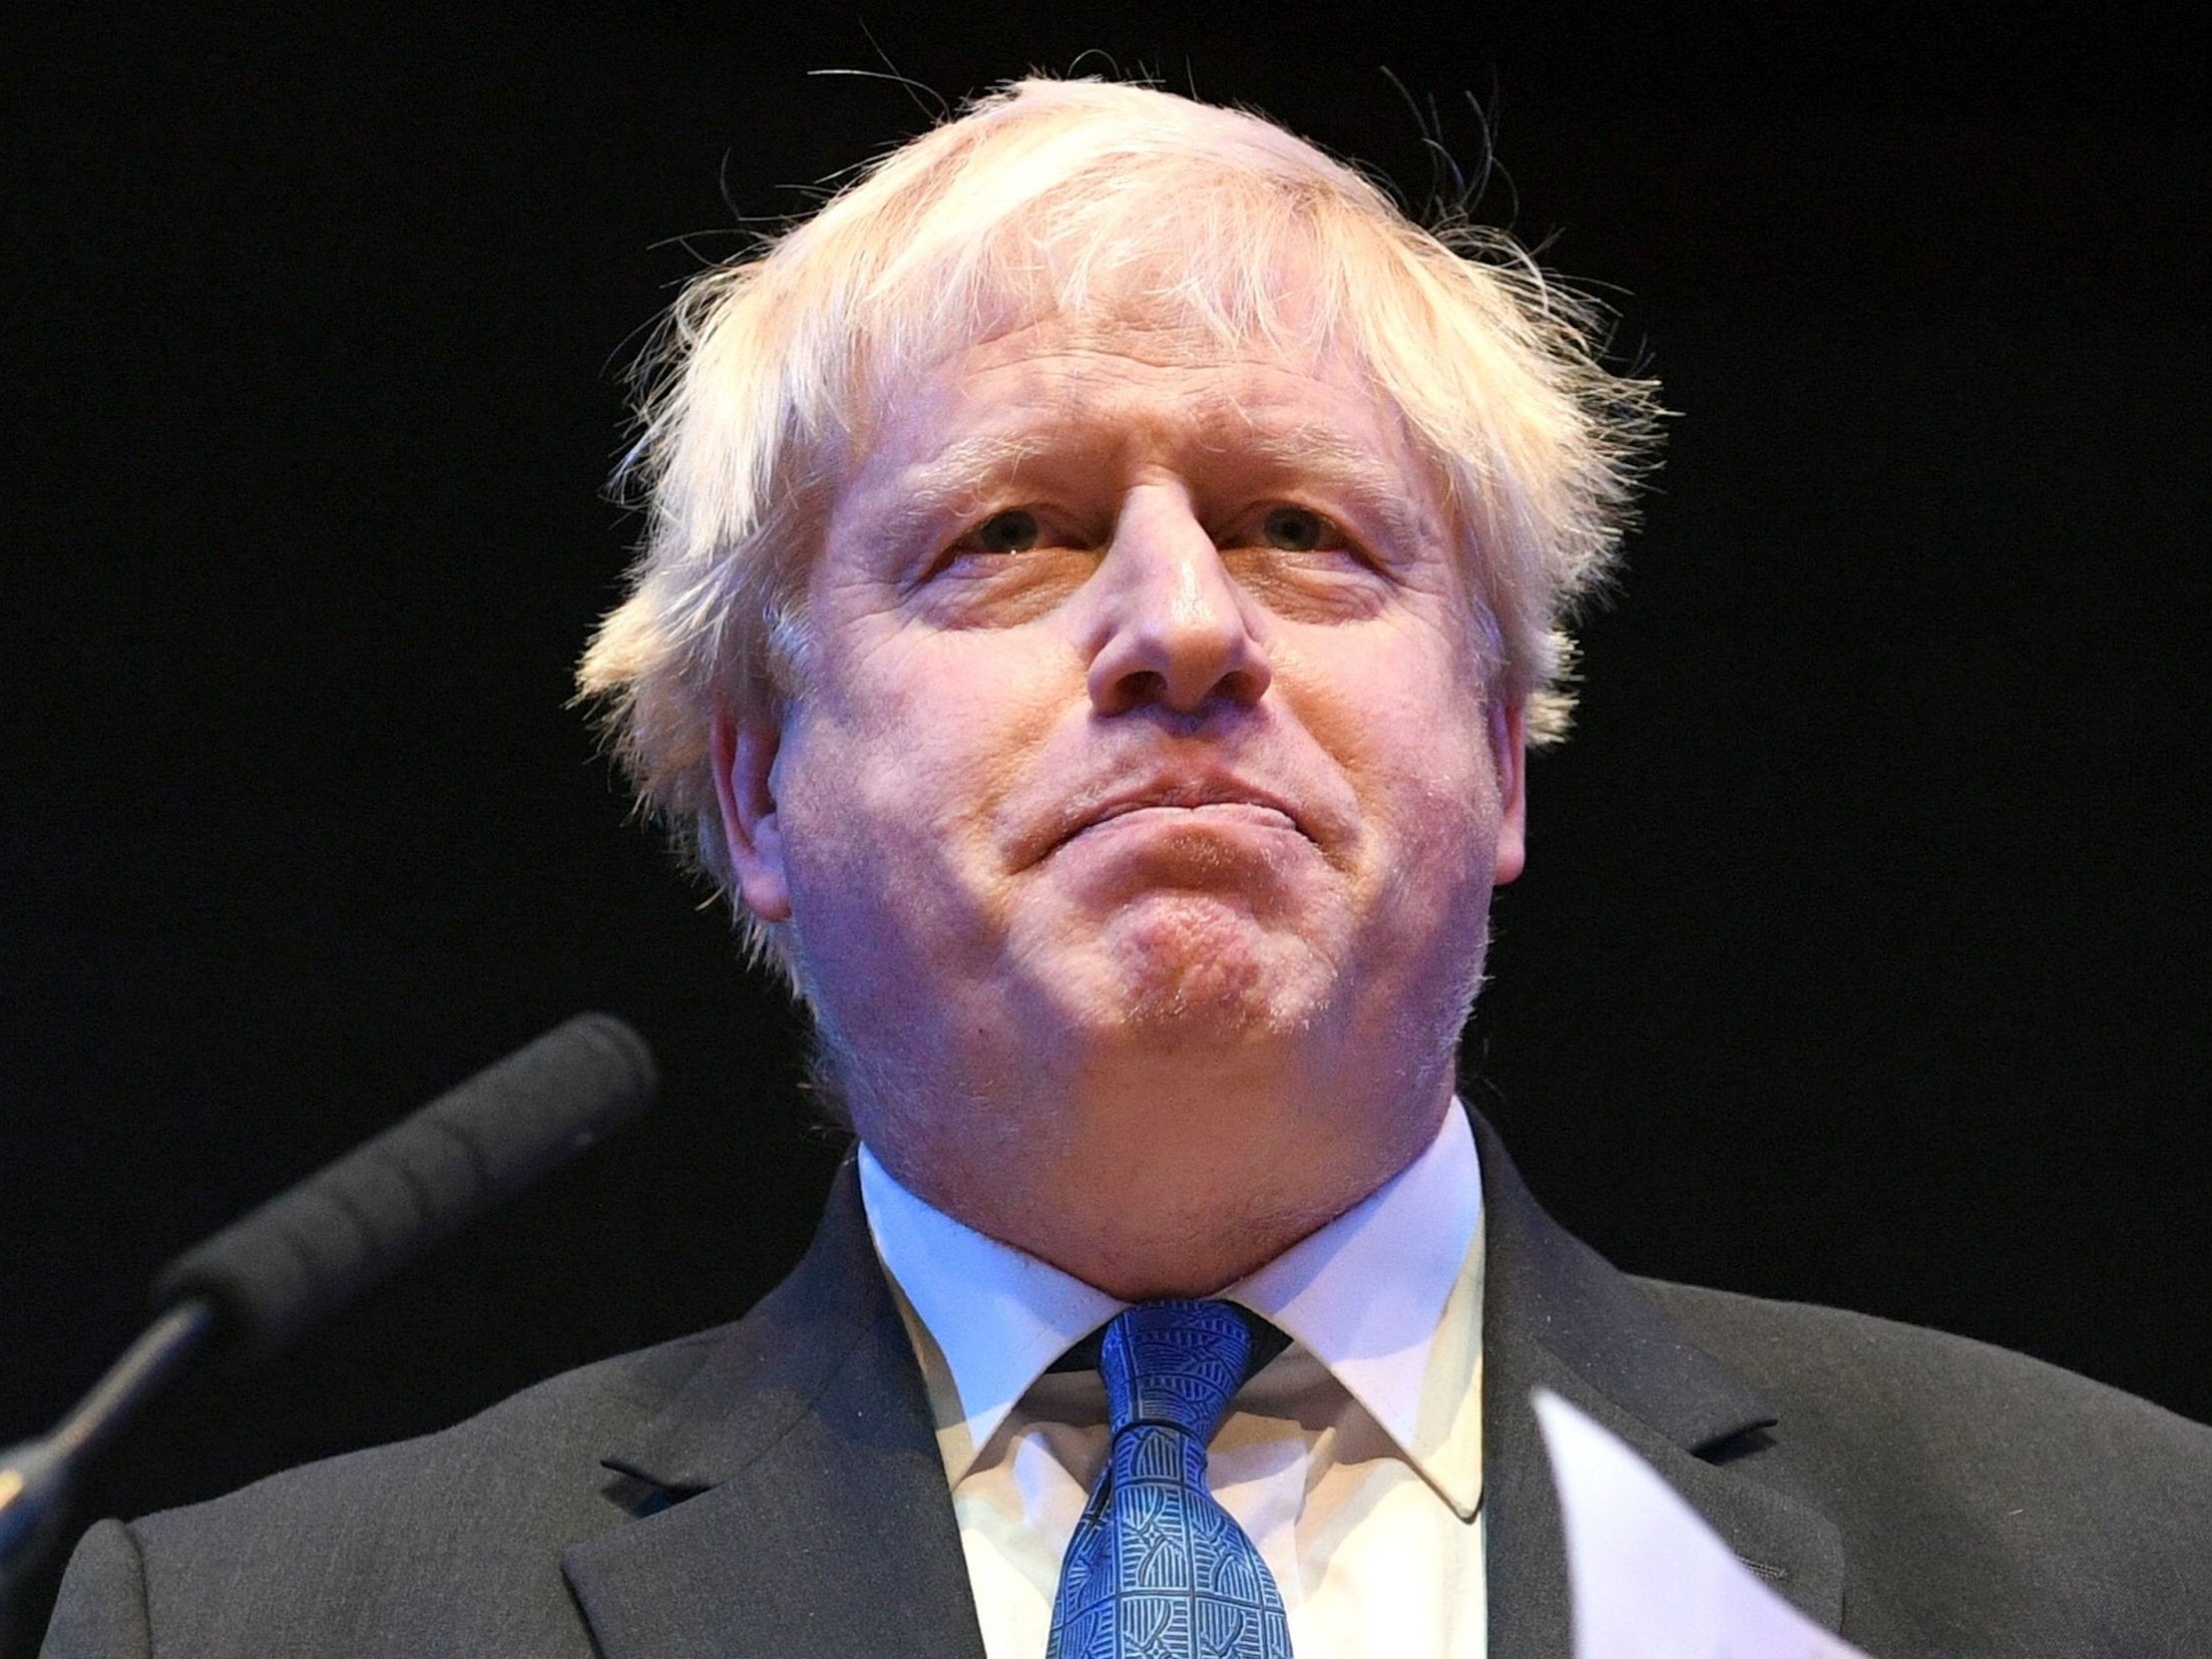 Boris Johnson refused to apologise over his controversial remarks about Islamic clothing